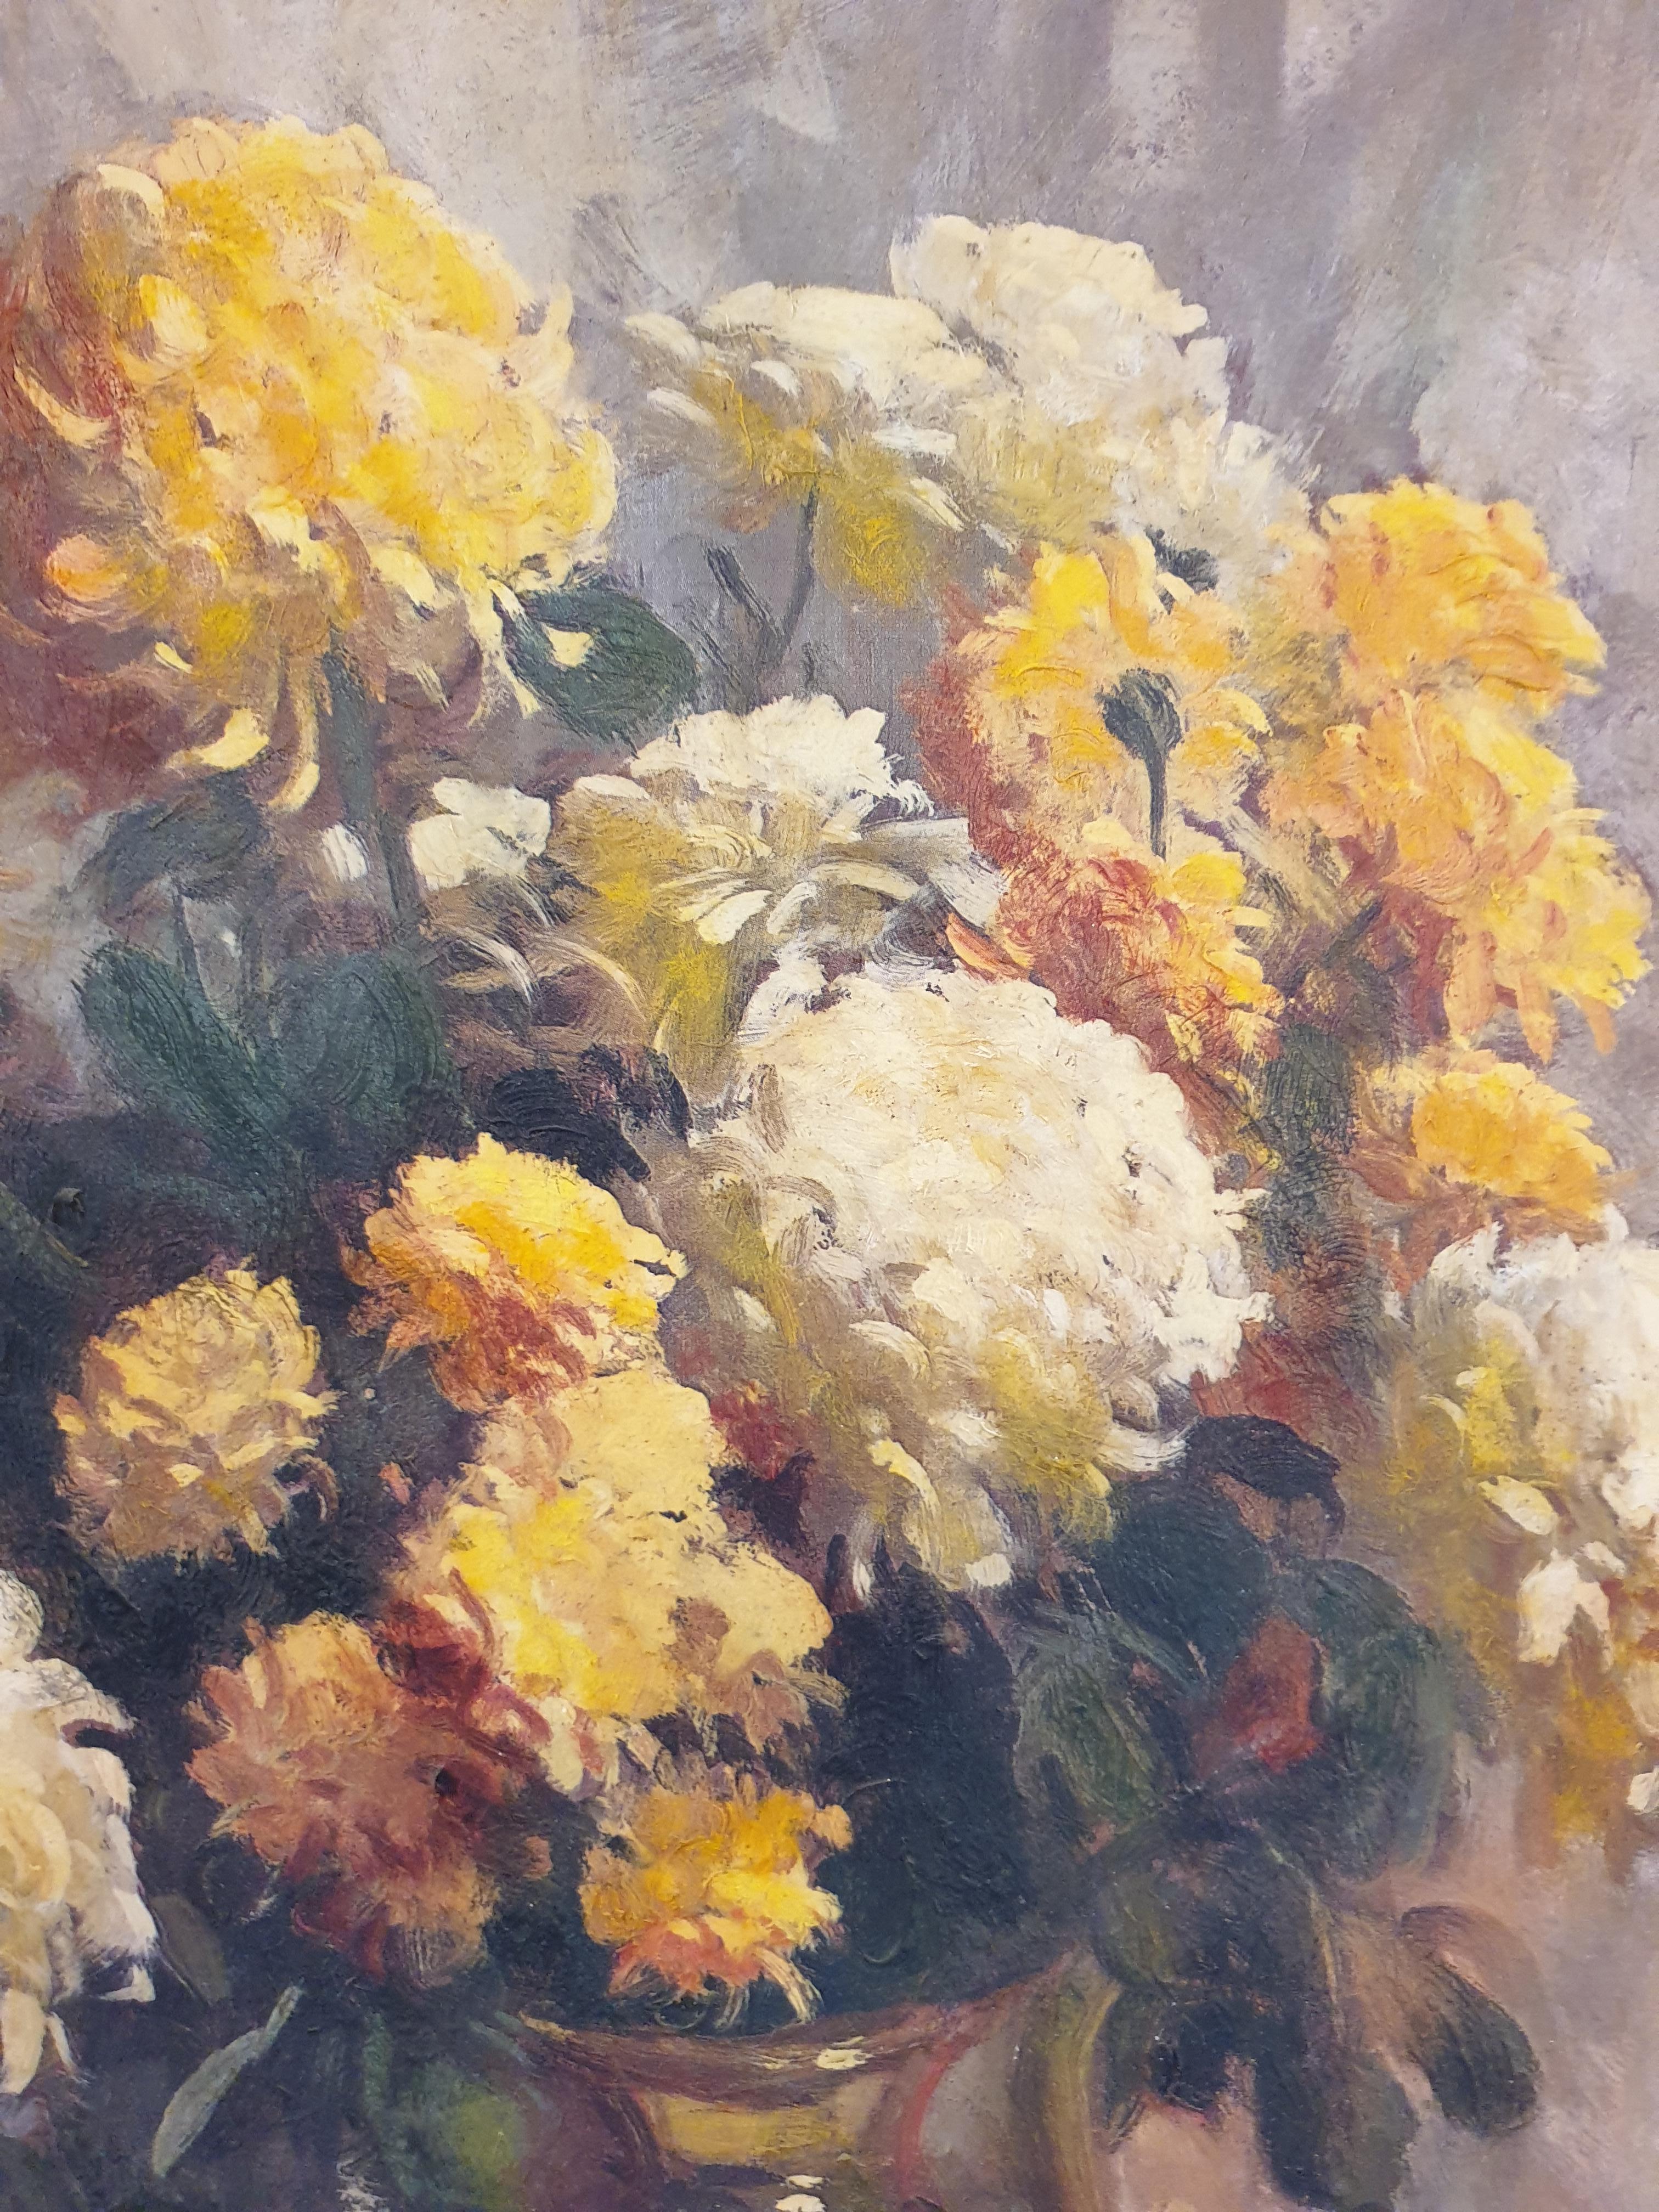 Mid-Century still life of chrysanthemums in copper vase, oil on canvas signed R Colao bottom left.

A wonderfully colourful and vibrant still life, beautifully painted in his characteristic slightly impressionistic style. A quality piece as it is a